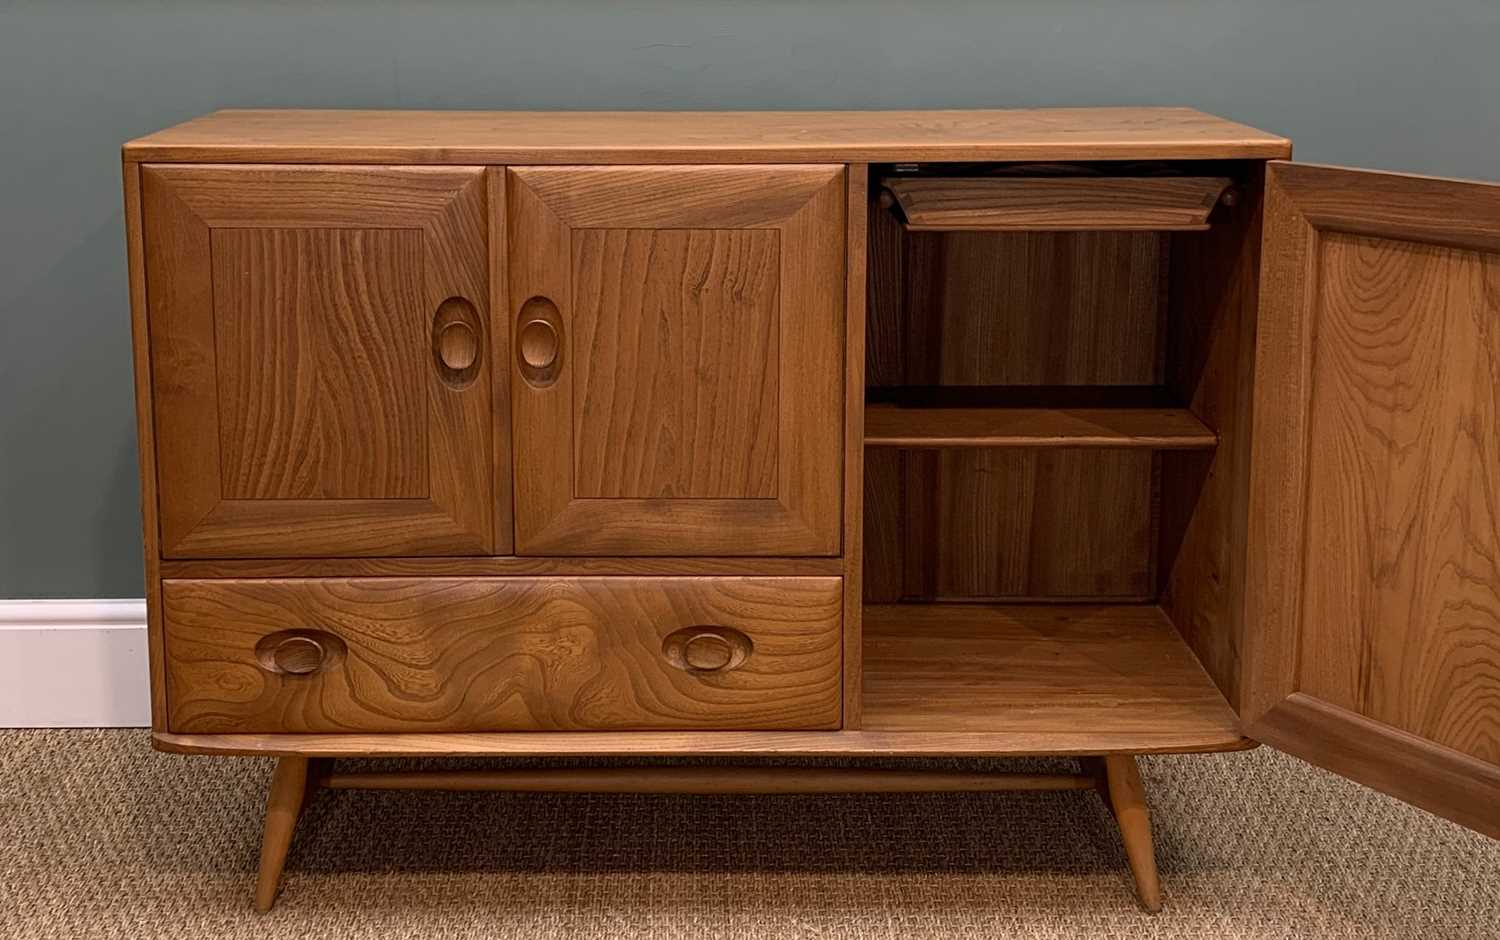 MID-CENTURY ERCOL 467 SIDEBOARD, solid elm and beech, natural wax finish, lift-out cutlery tray with - Image 6 of 7